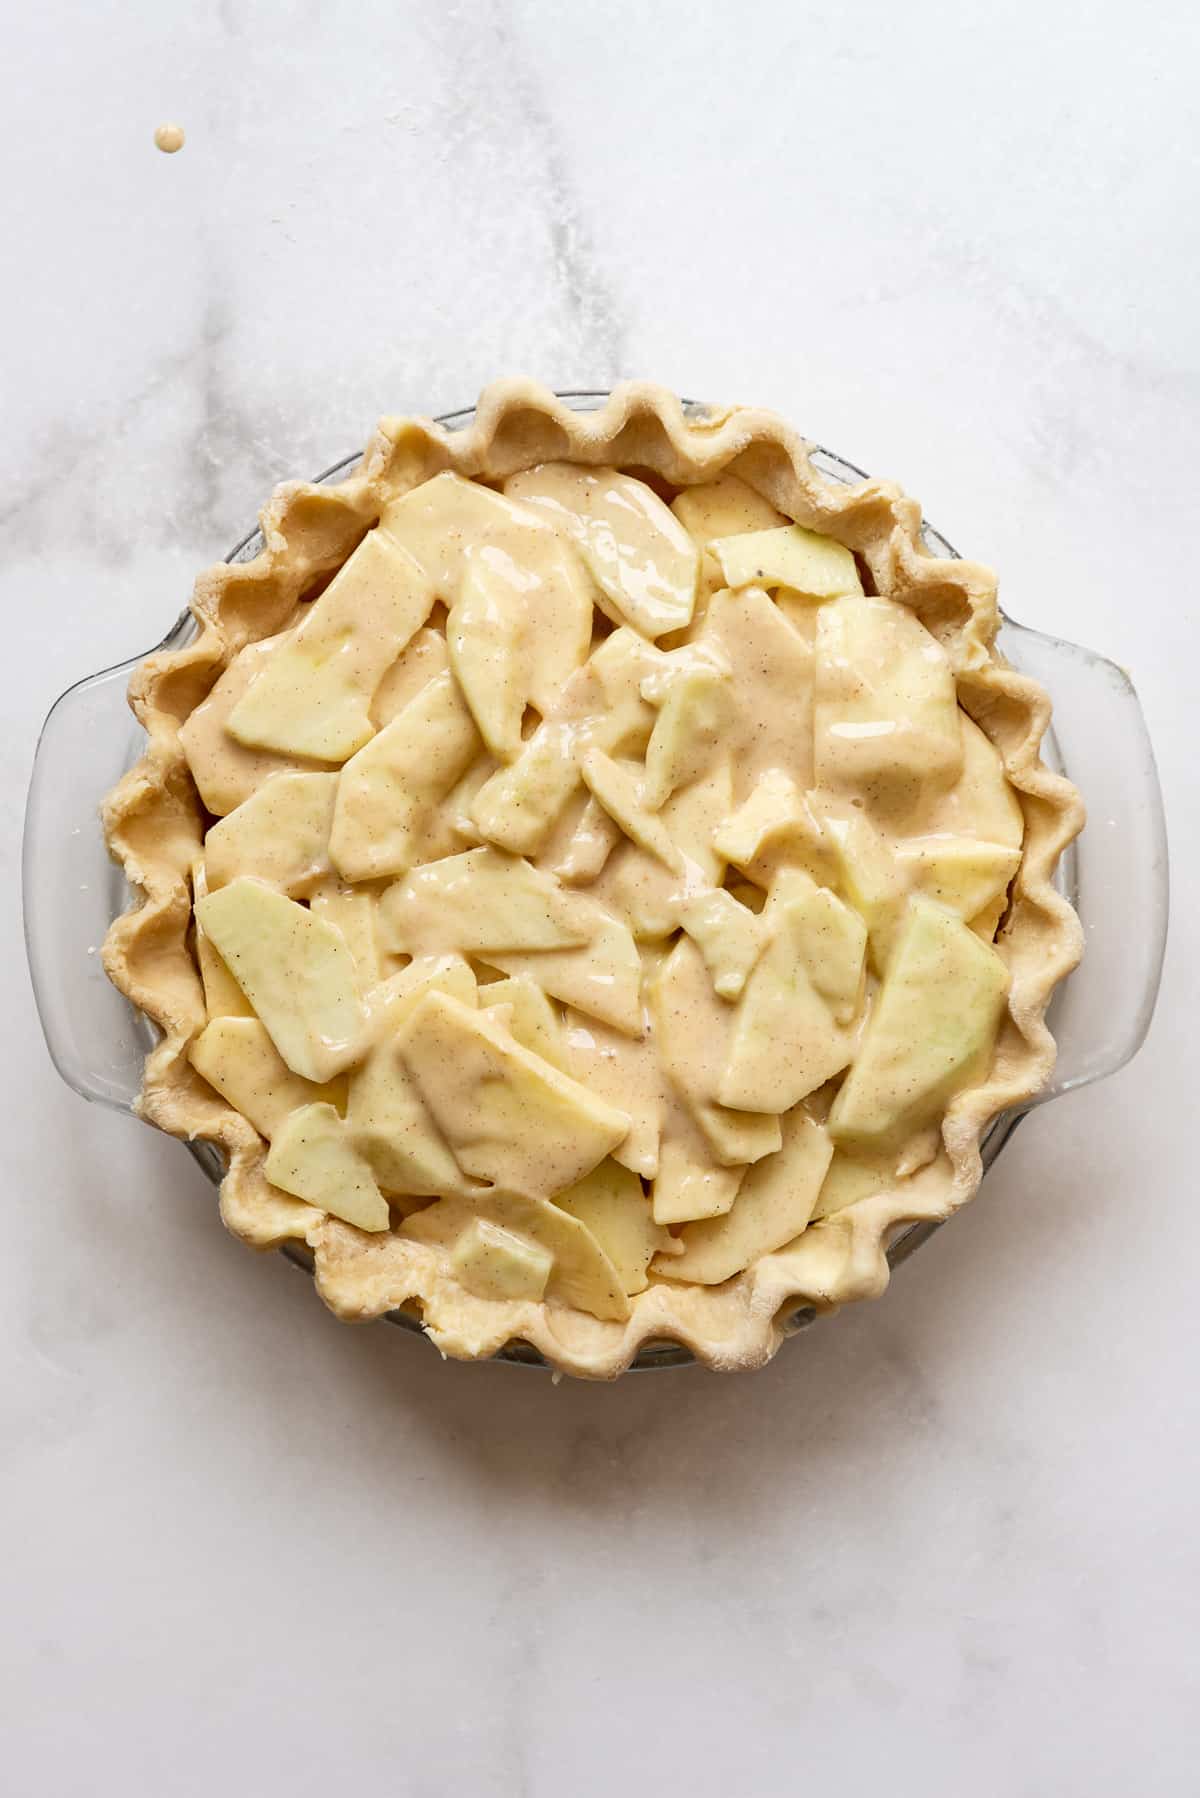 Sliced apples in a pie crust before baking.